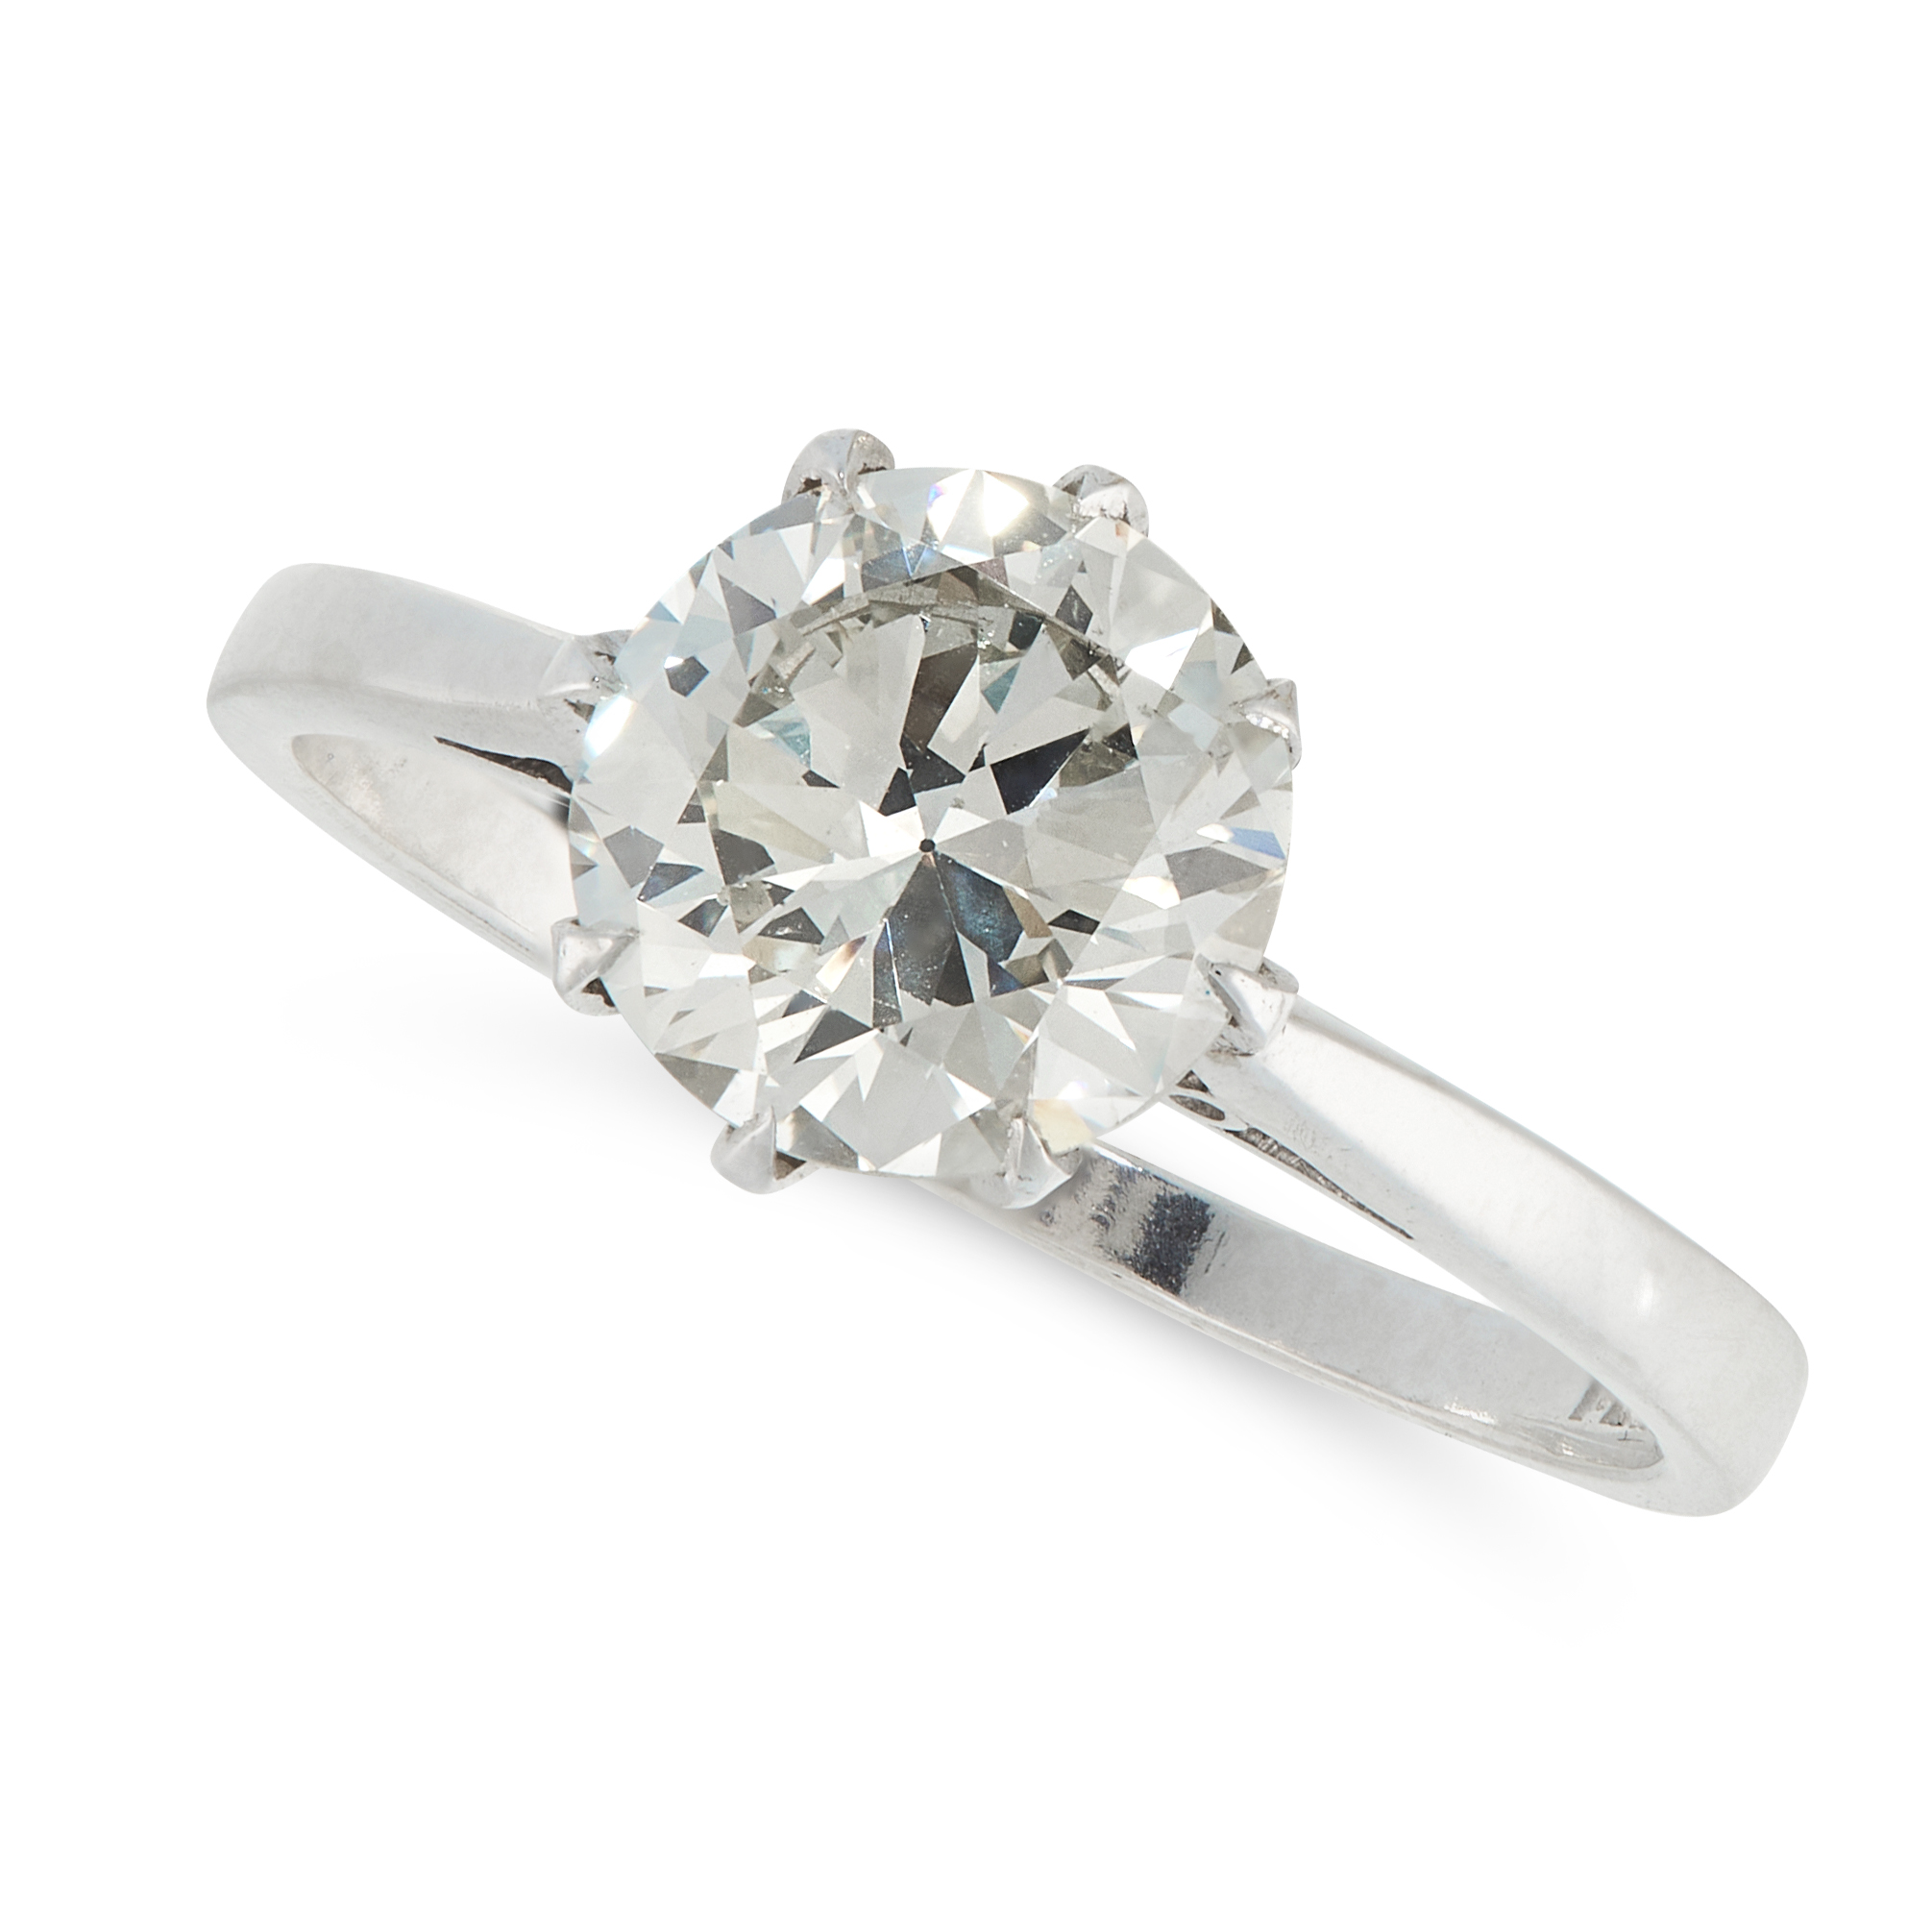 A SOLITAIRE DIAMOND RING, EARLY 20TH CENTURY in platinum, set with a transitiona roundl cut